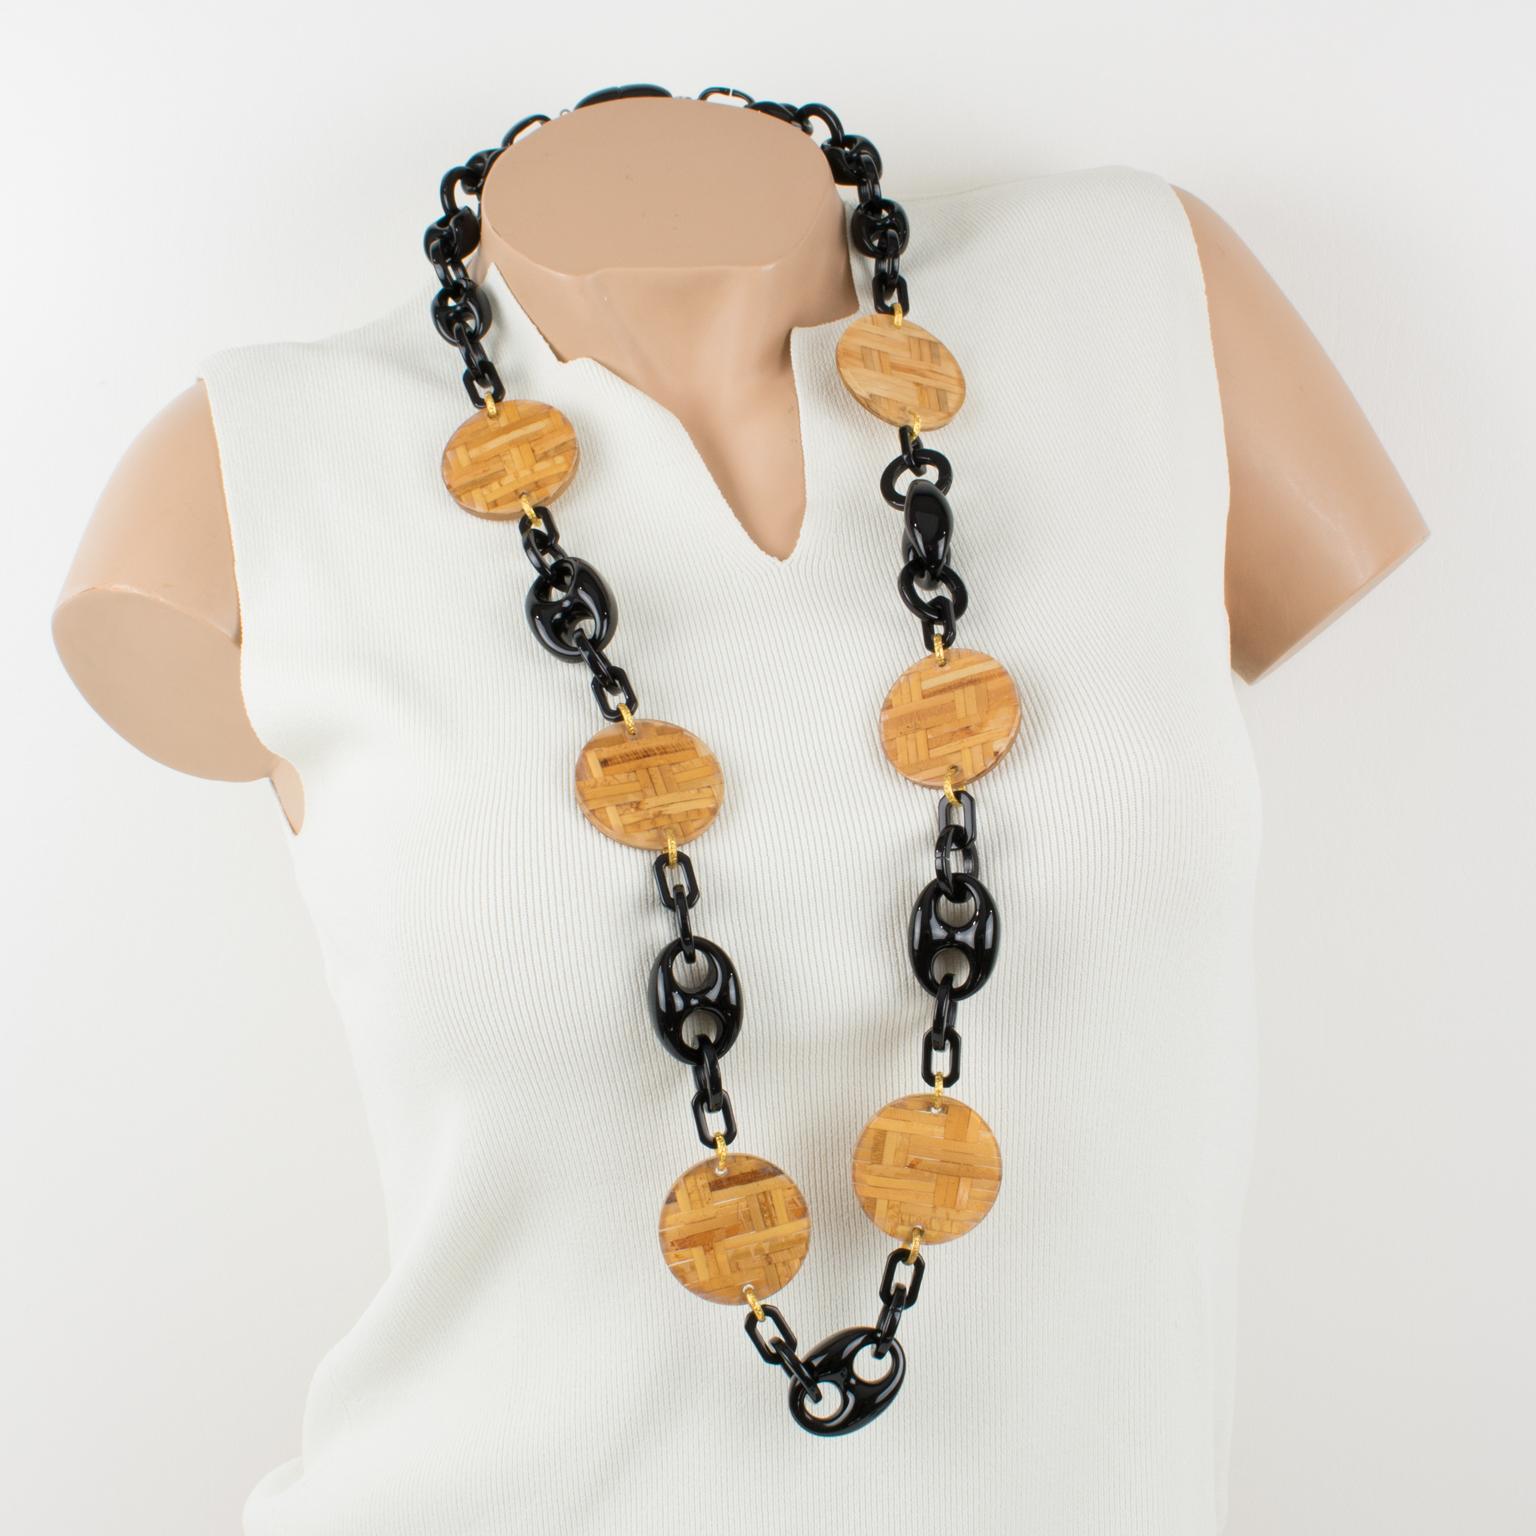 This stunning Angela Caputi, made in Italy resin and Lucite necklace, boasts an extra-long shape with black resin geometric elements contrasted with large flat disks in clear Lucite with embedded rattan or wicker. Her color matching is always